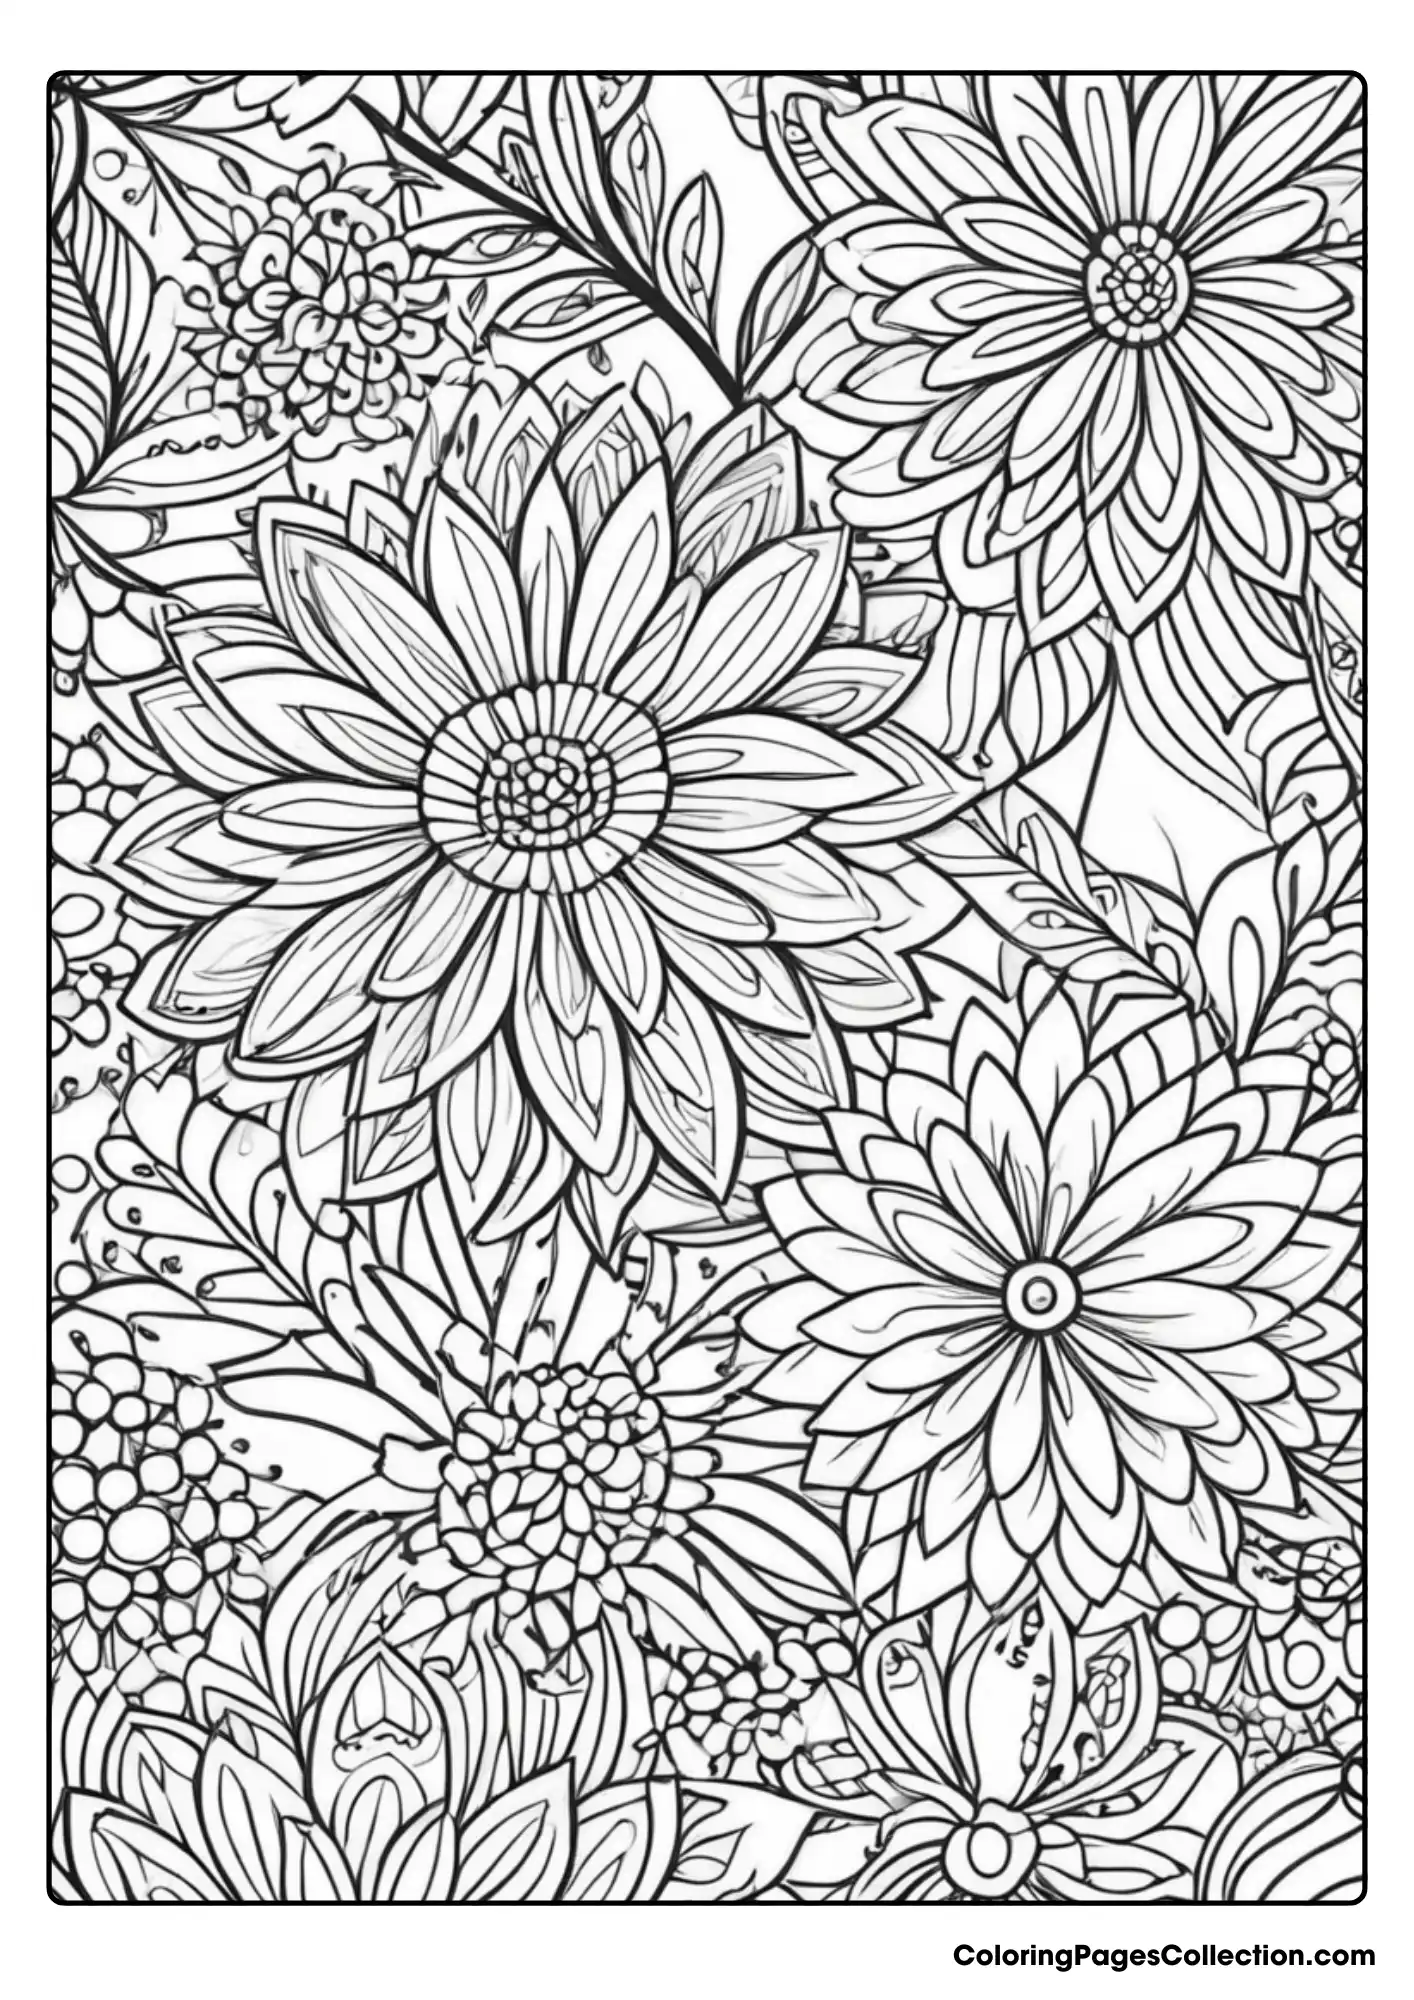 Coloring pages for teens, Floral Art Coloring Page